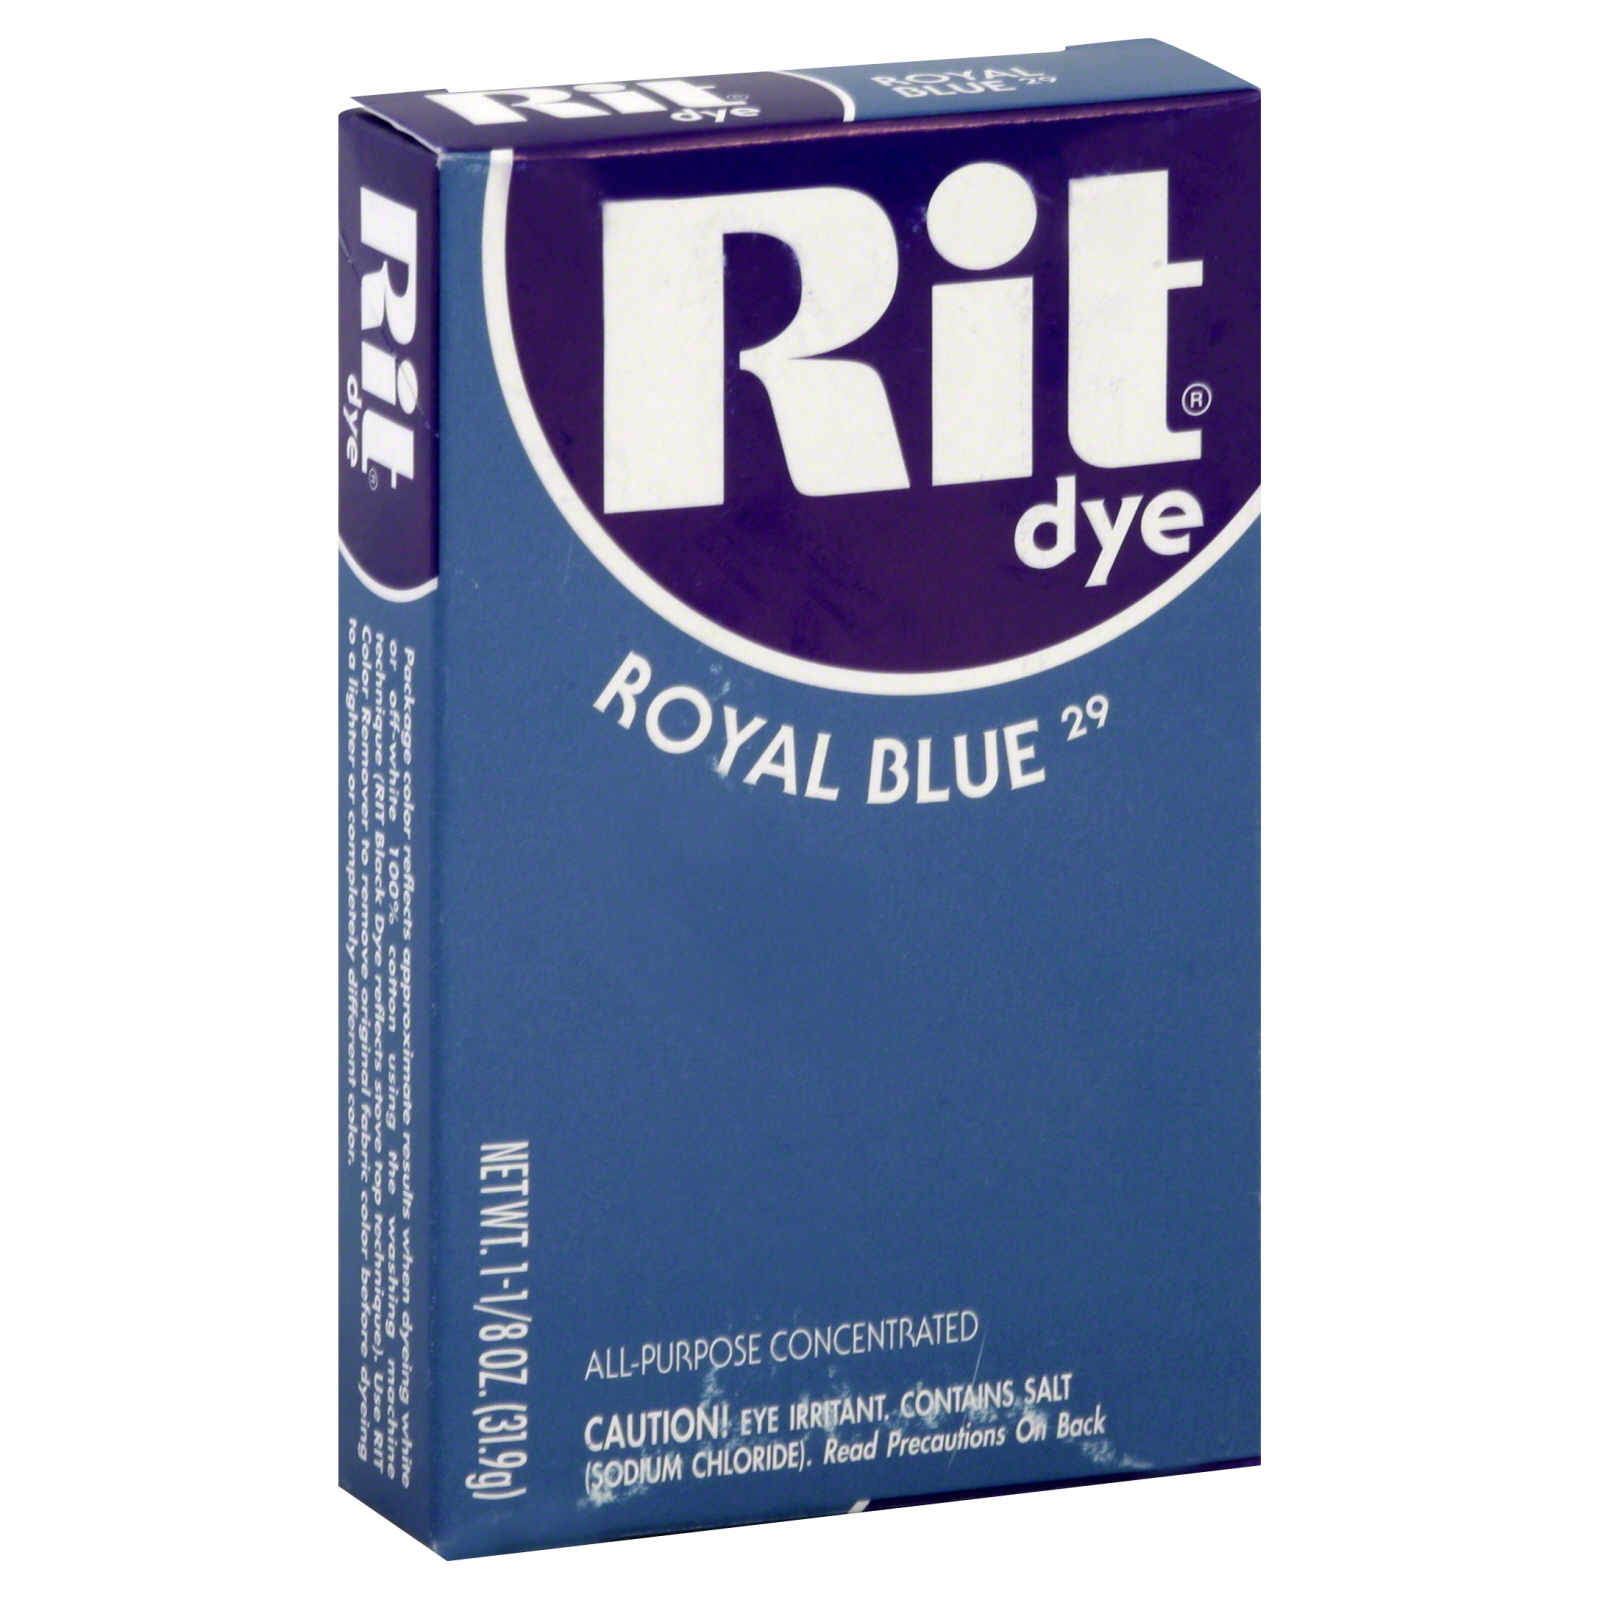 Rit Dye Tinite All-Purpose Concentrated Royal Blue Azul Royal.11/8 OZ.  (31.9 g).